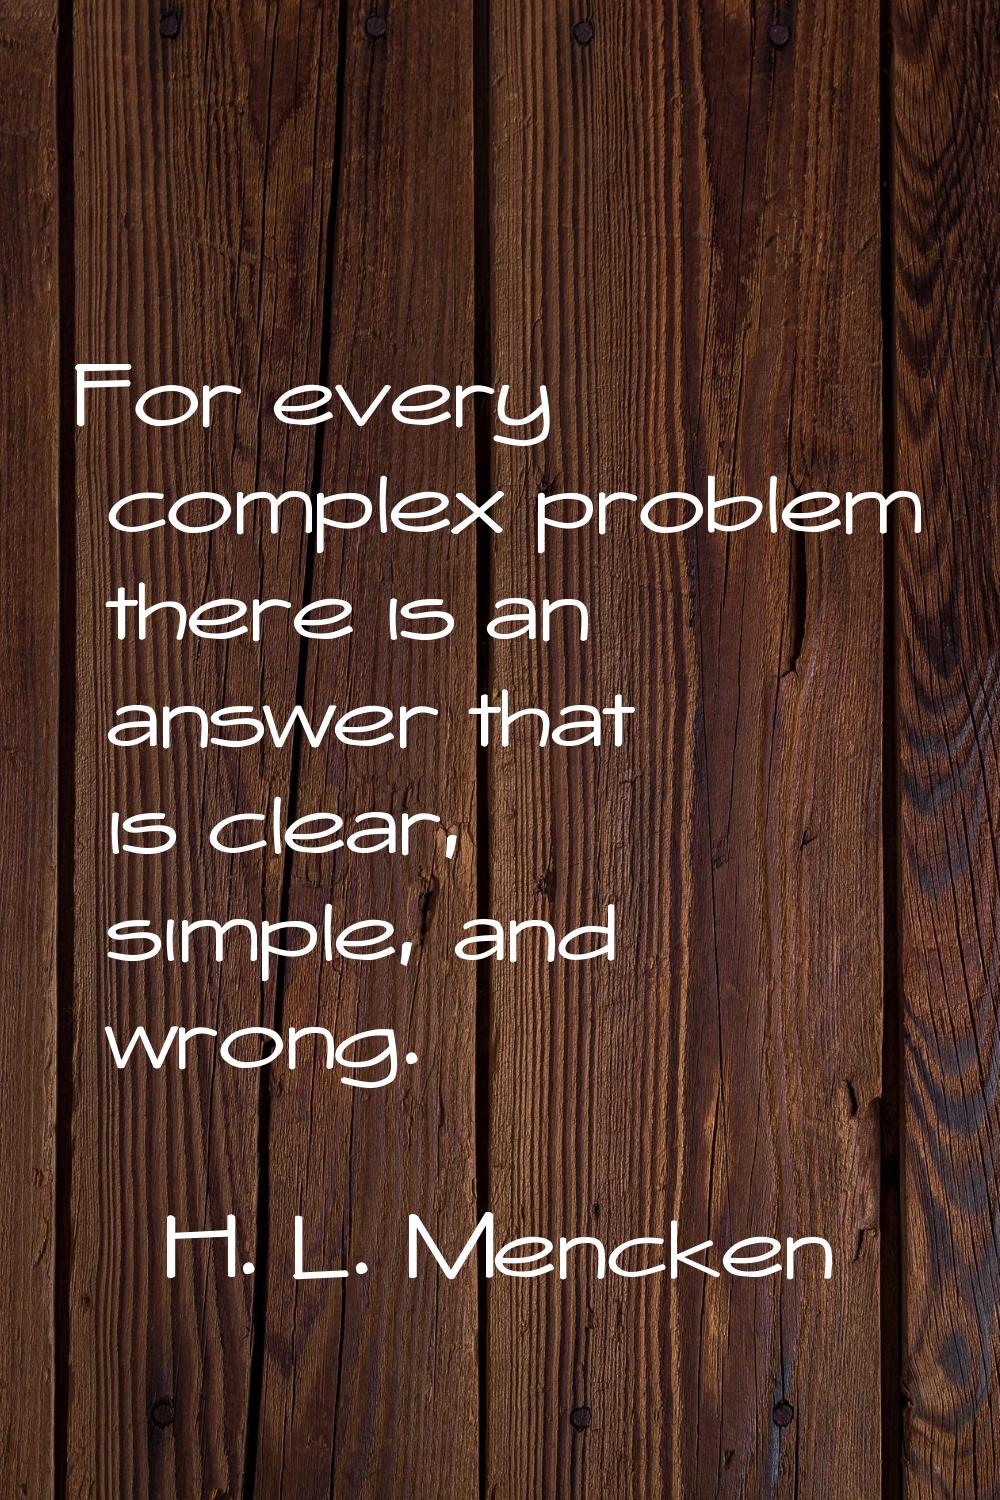 For every complex problem there is an answer that is clear, simple, and wrong.